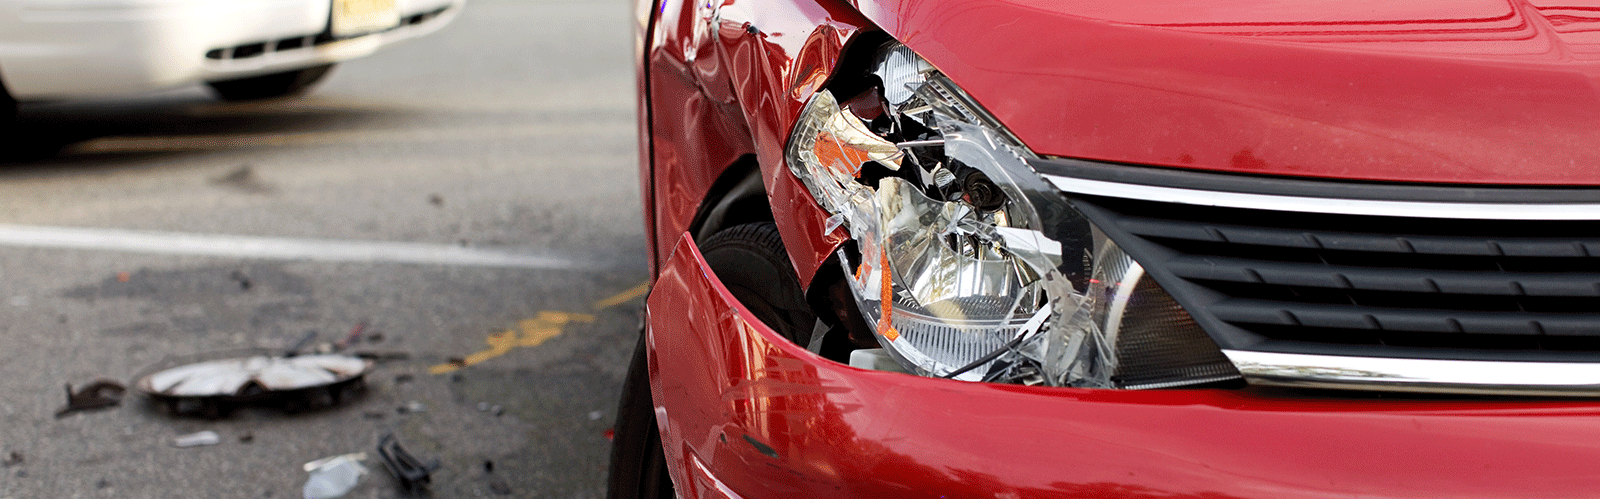 red car with broken light from crash